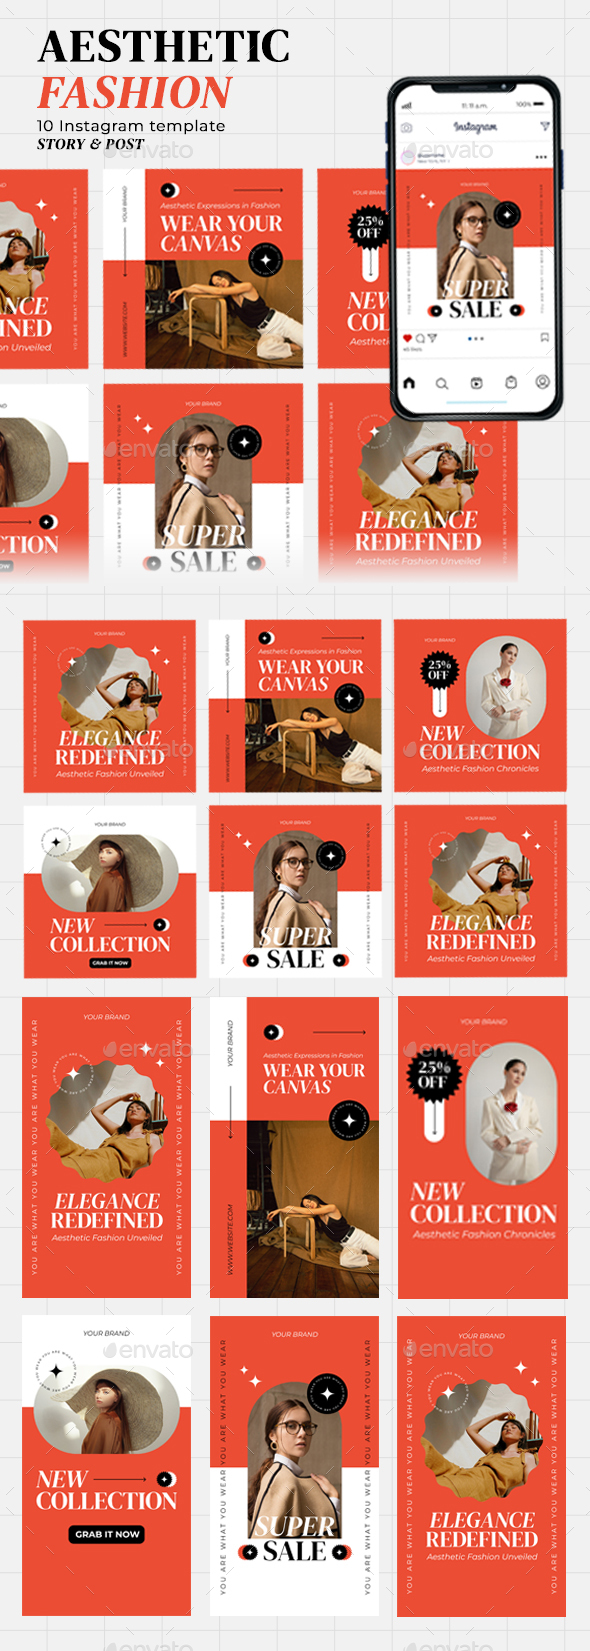 Aesthetic Fashion Brand Instagram Template